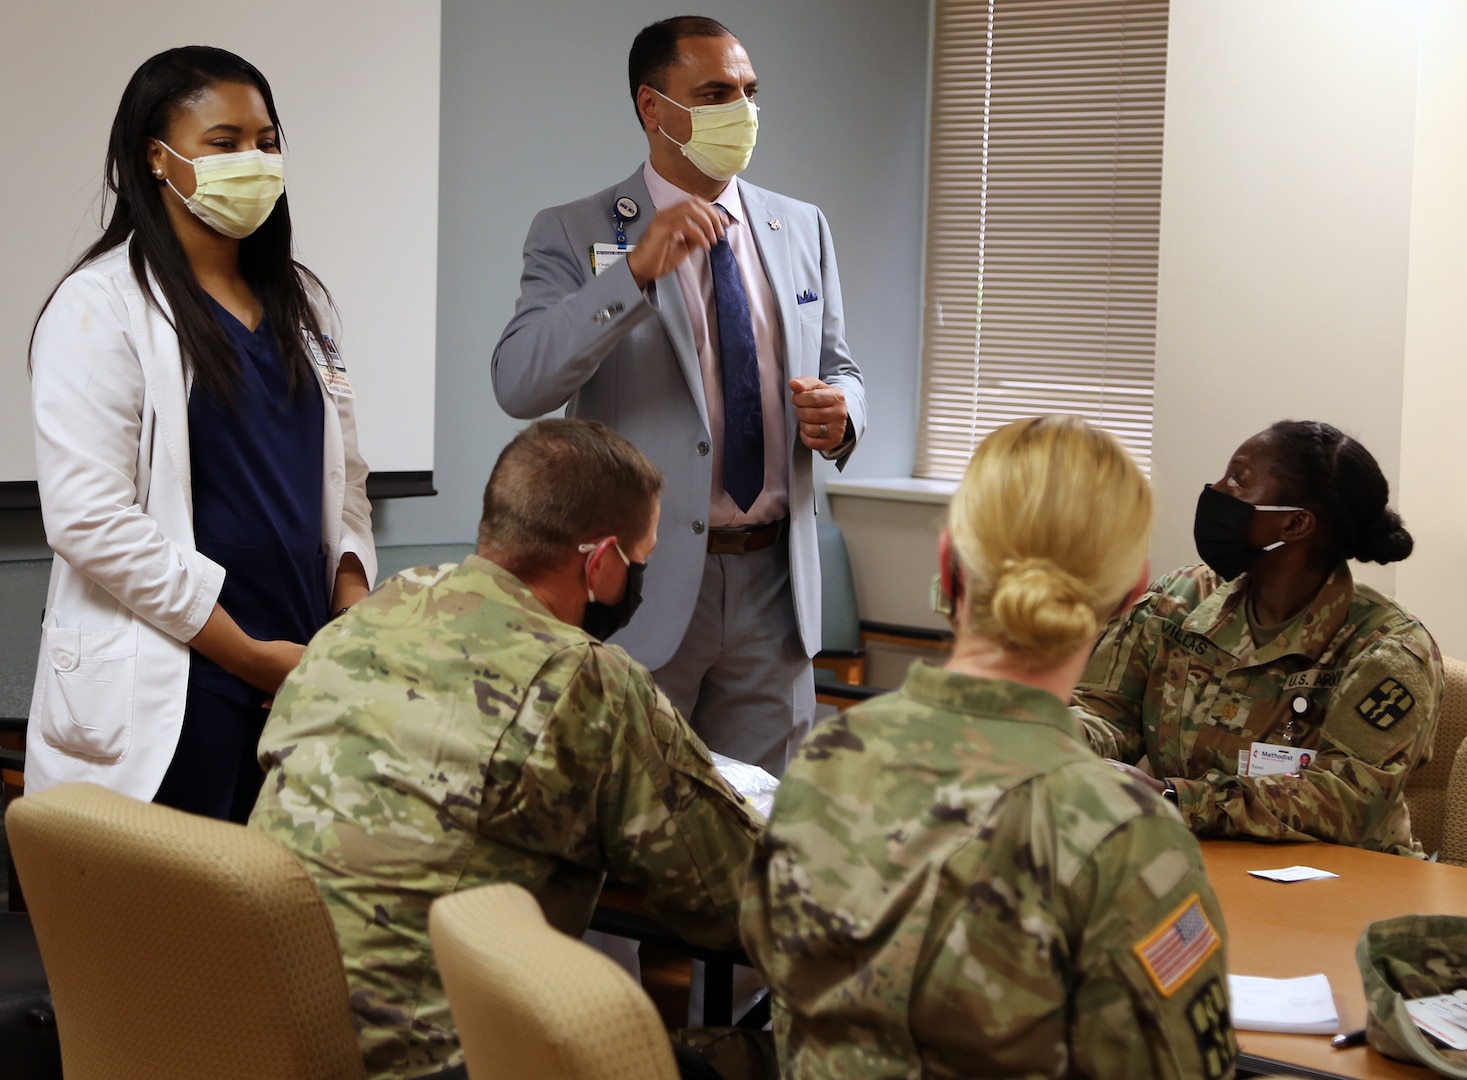 Soldiers from the Urban Augmentation Medical Task Force-627 are briefed by Chadi Awao, Chief Nursing Officer, and Ashley Holmstrom, Assistant Chief Nursing Officer, during integration and training at the Metropolitan Methodist Hospital in San Antonio July 8.